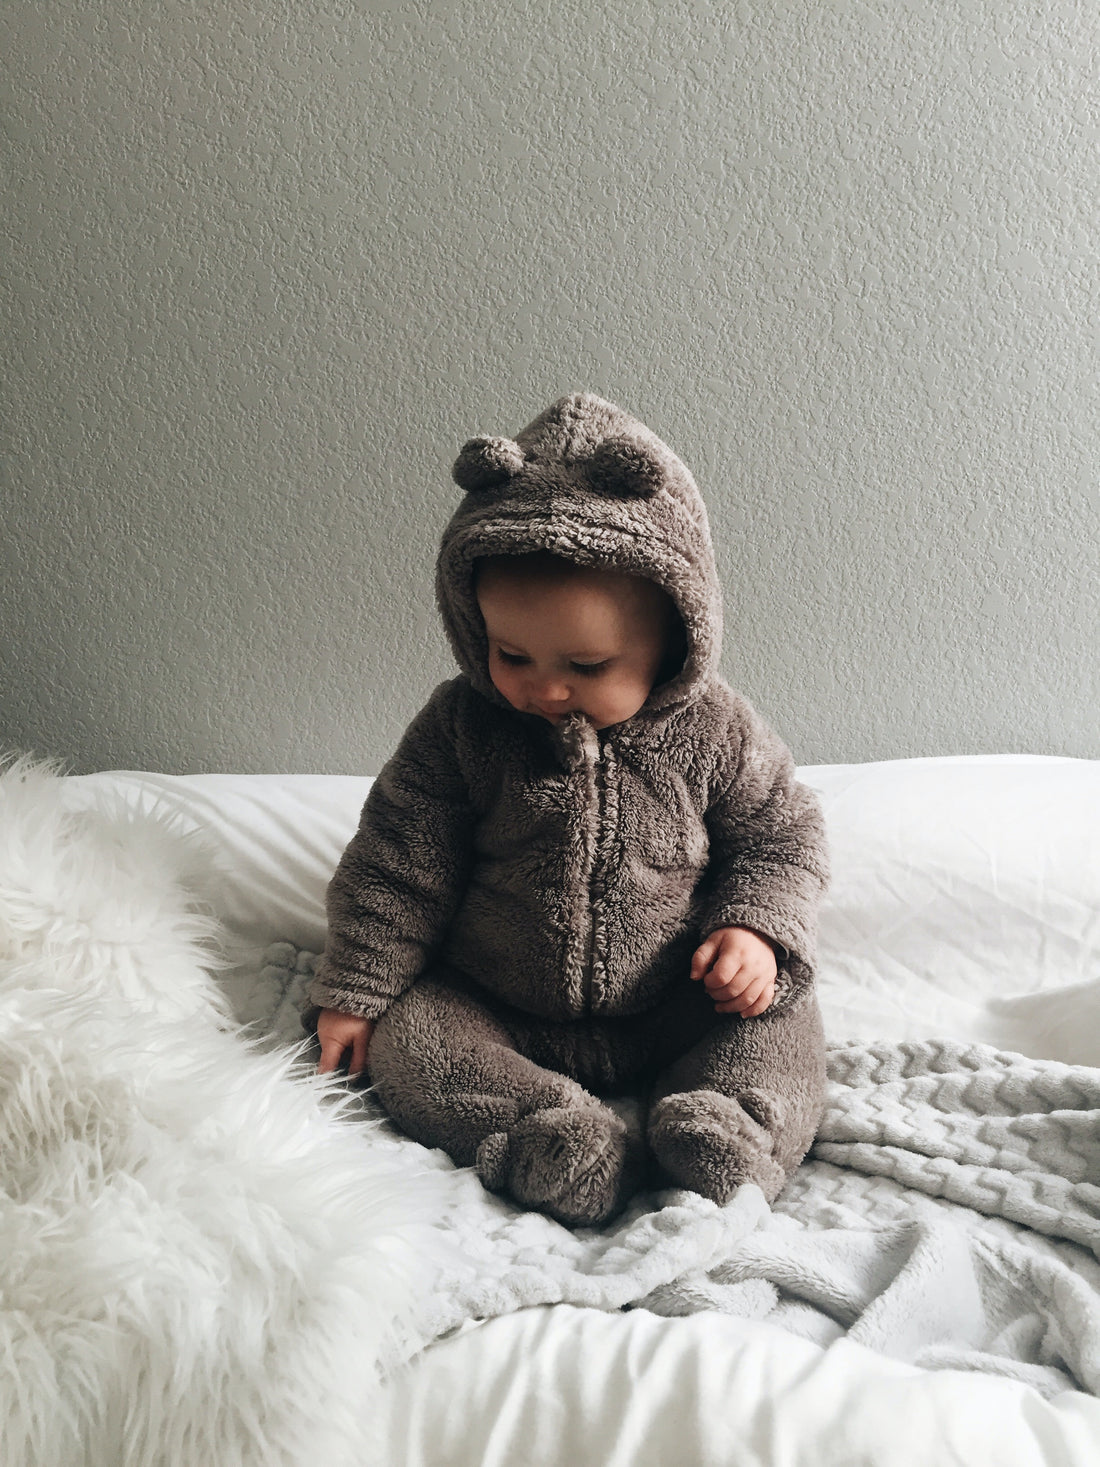 Winter Wonder: A Guide to Shopping for a Baby Born in the Cold Months